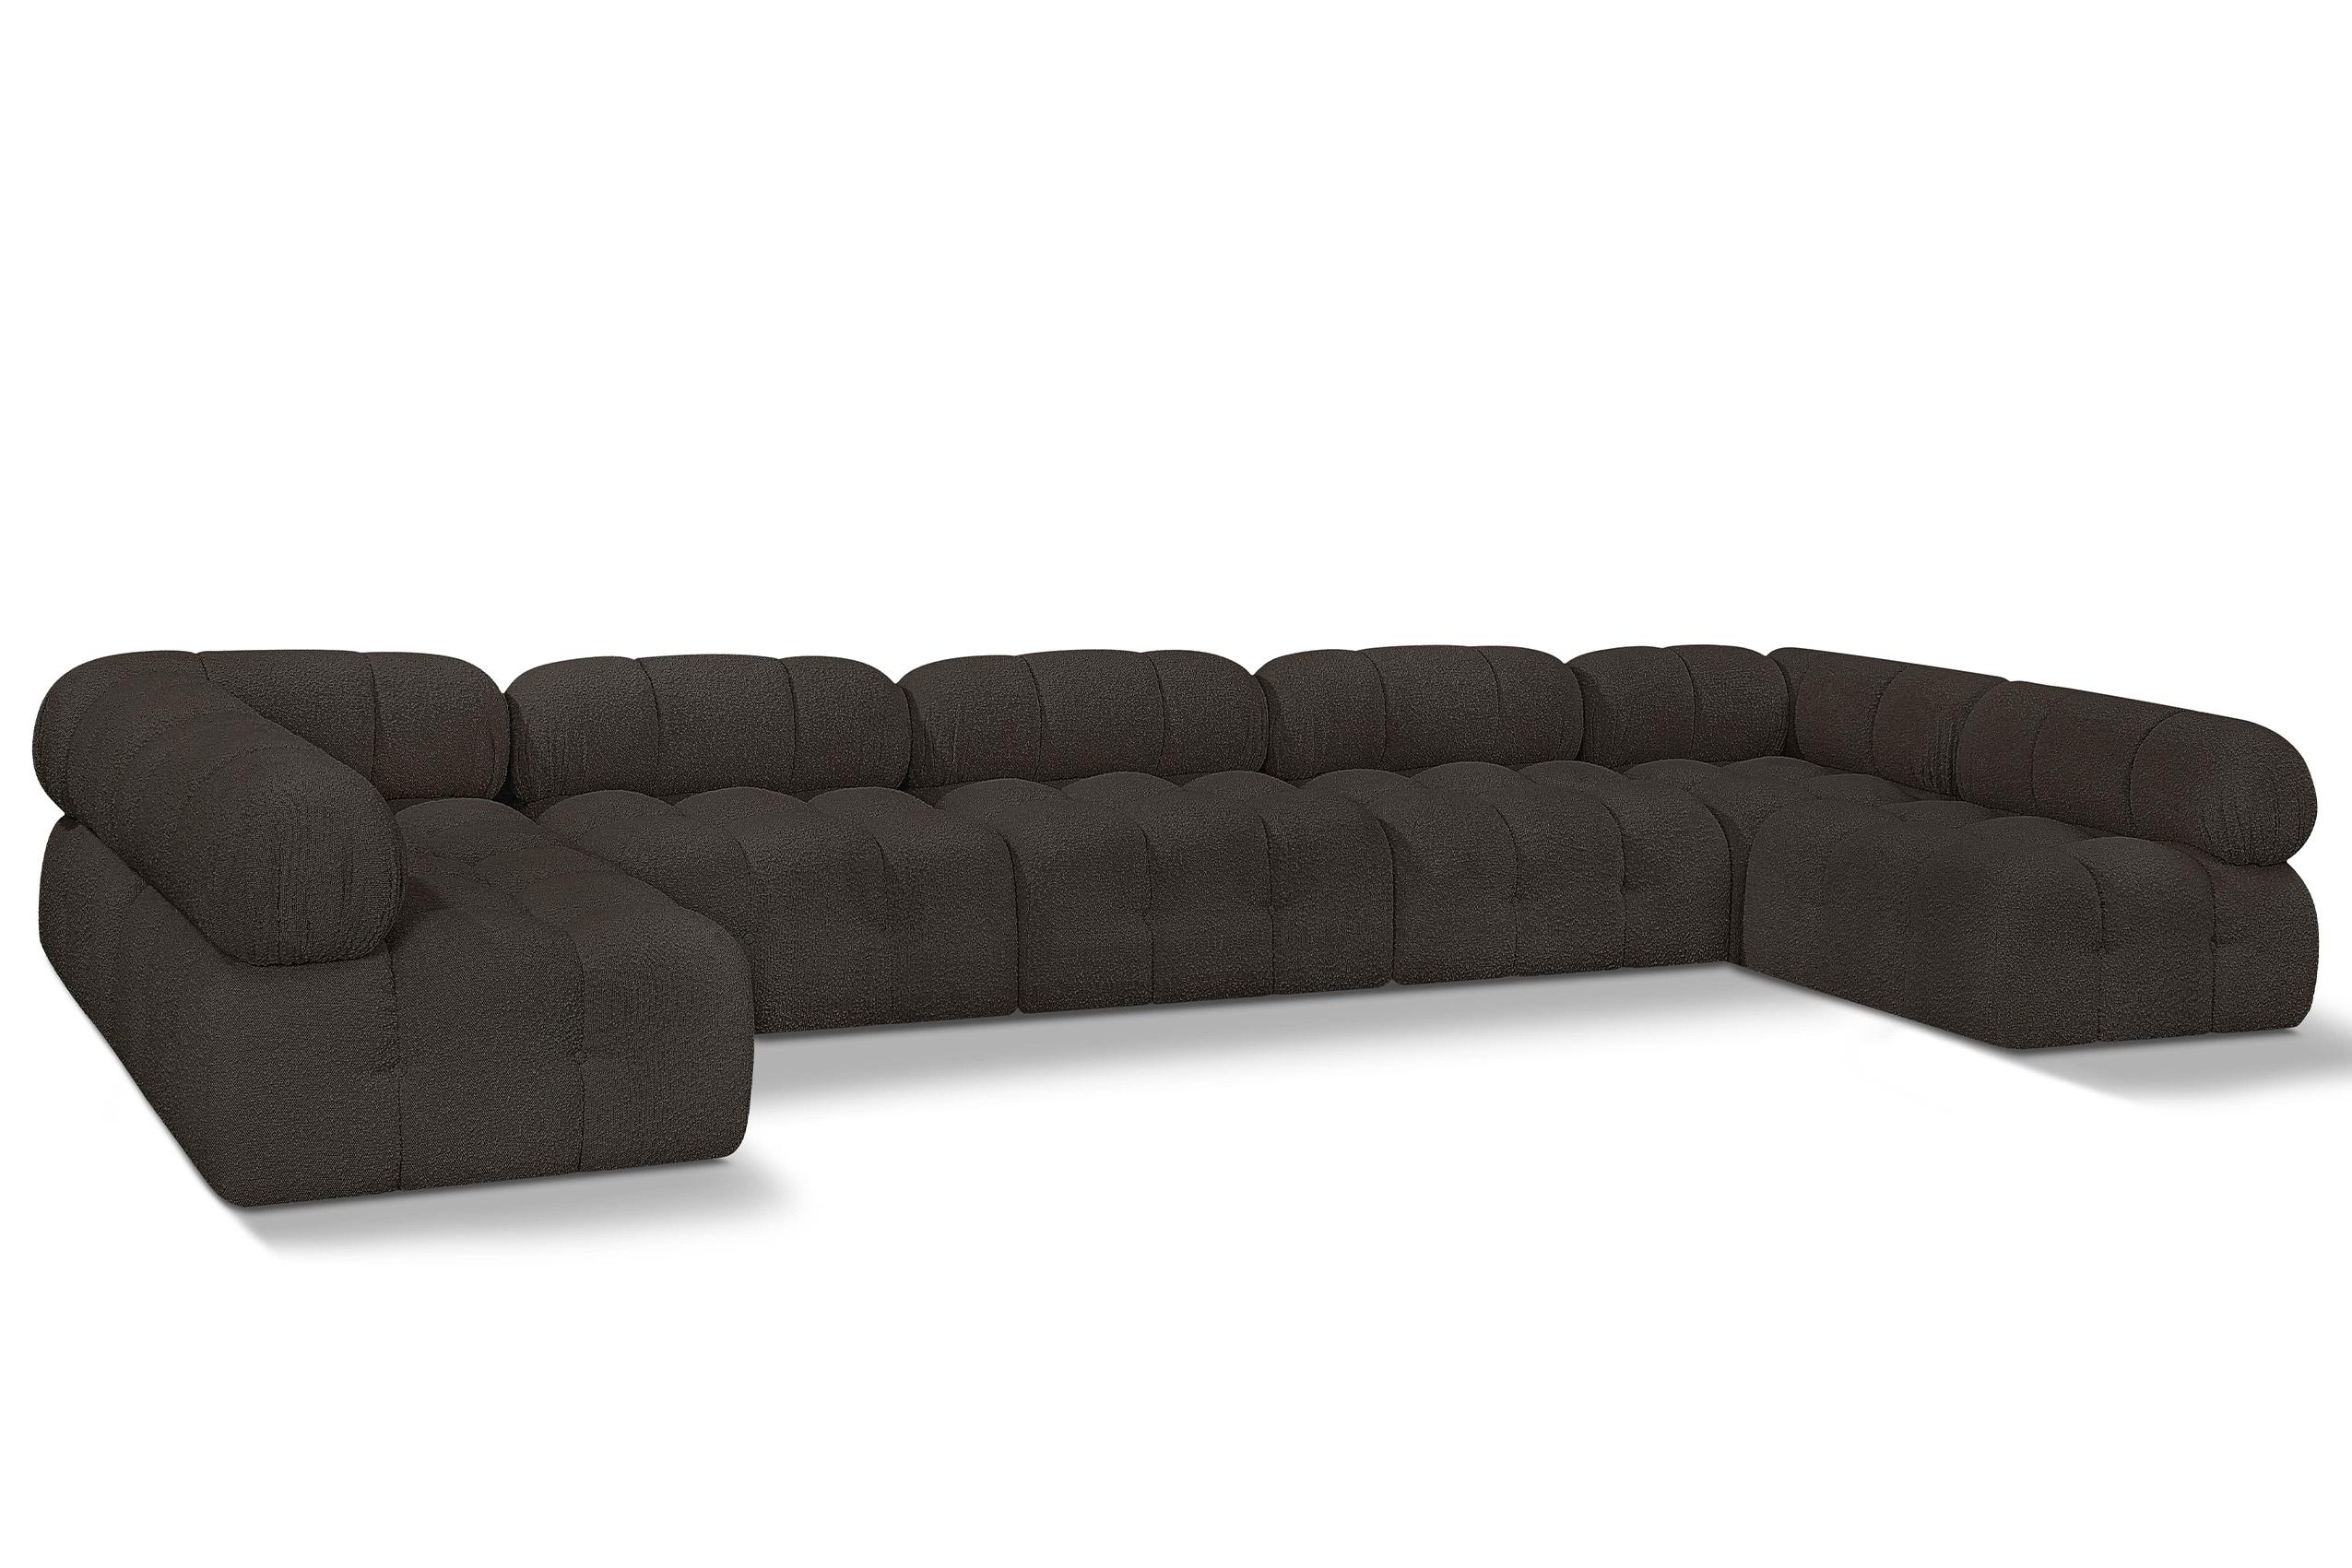 Contemporary, Modern Modular Sectional AMES 611Brown-Sec7A 611Brown-Sec7A in Brown 